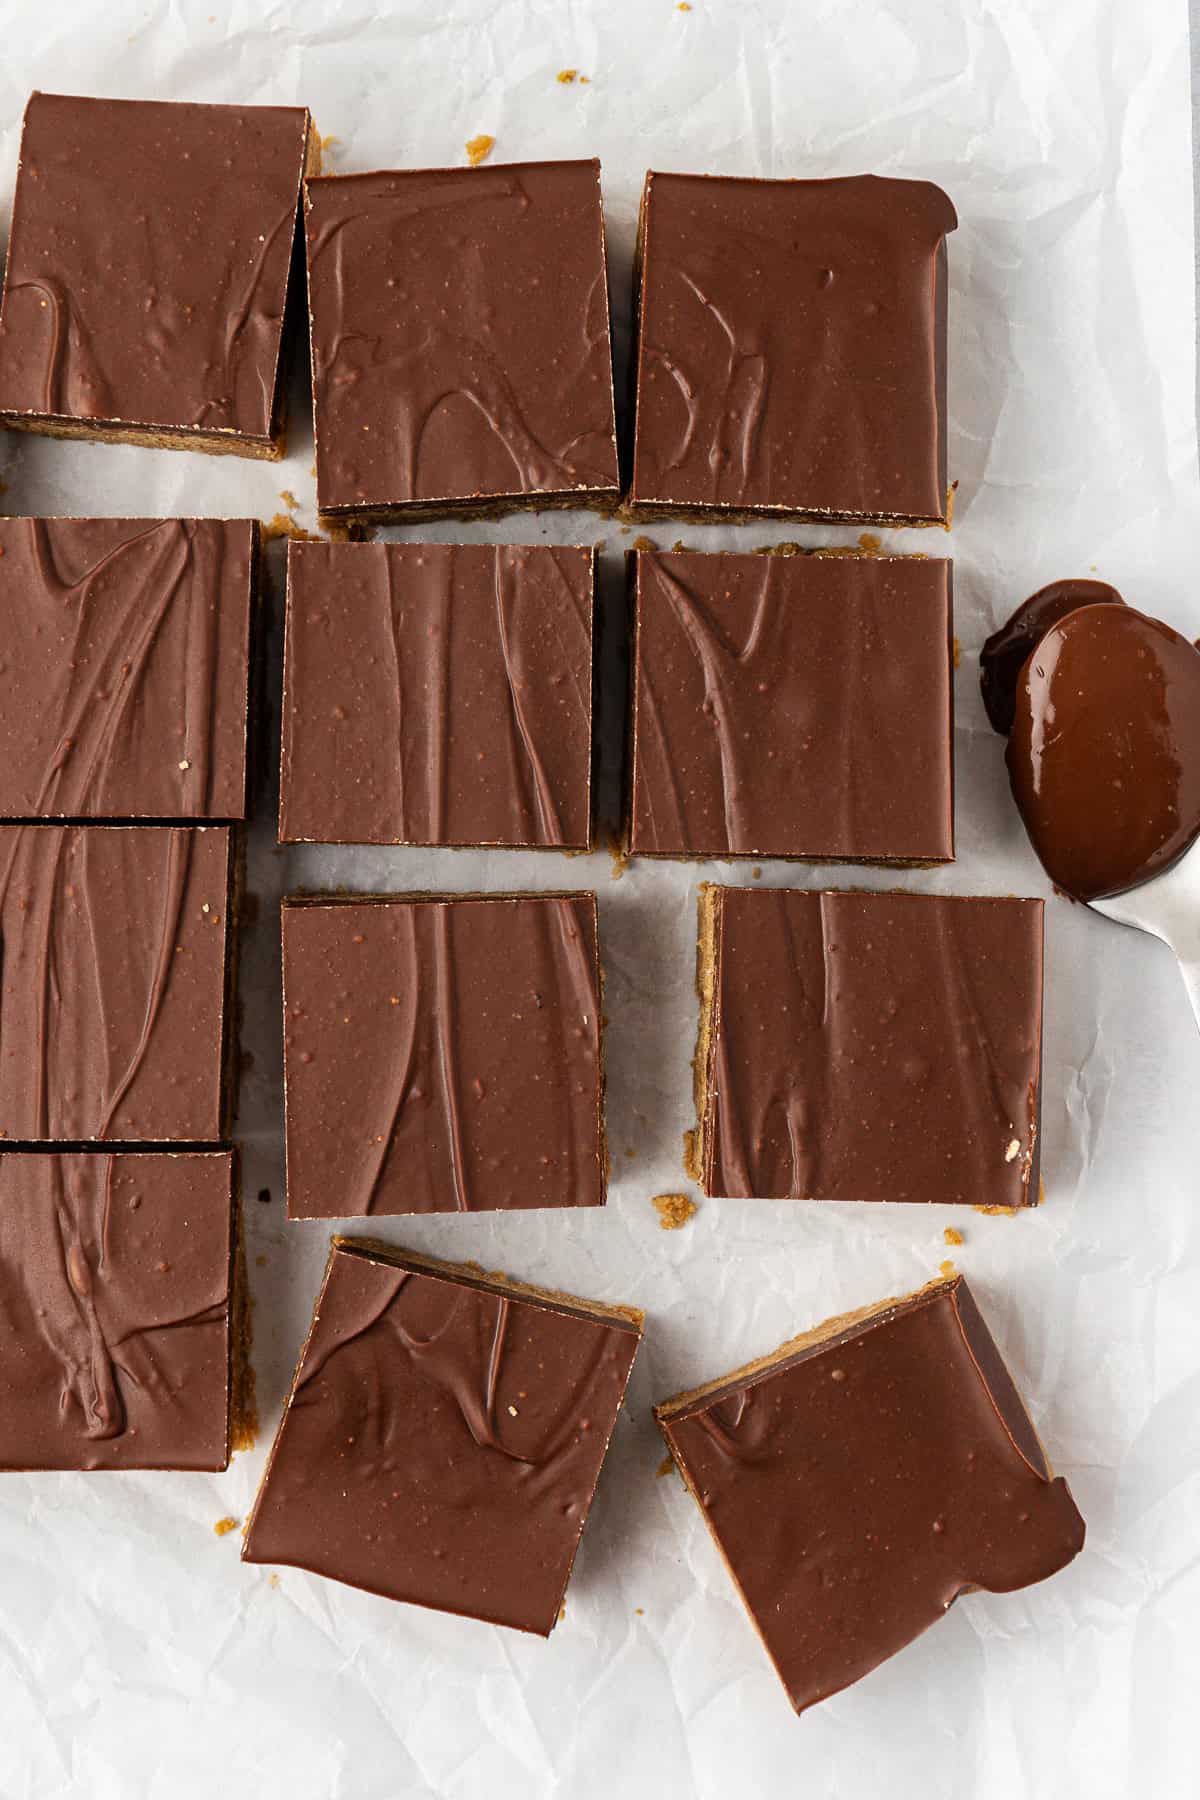 over head view of rows of peanut butter bars showing the top layer of chocolate with a spoon full of melted chocolate beside them